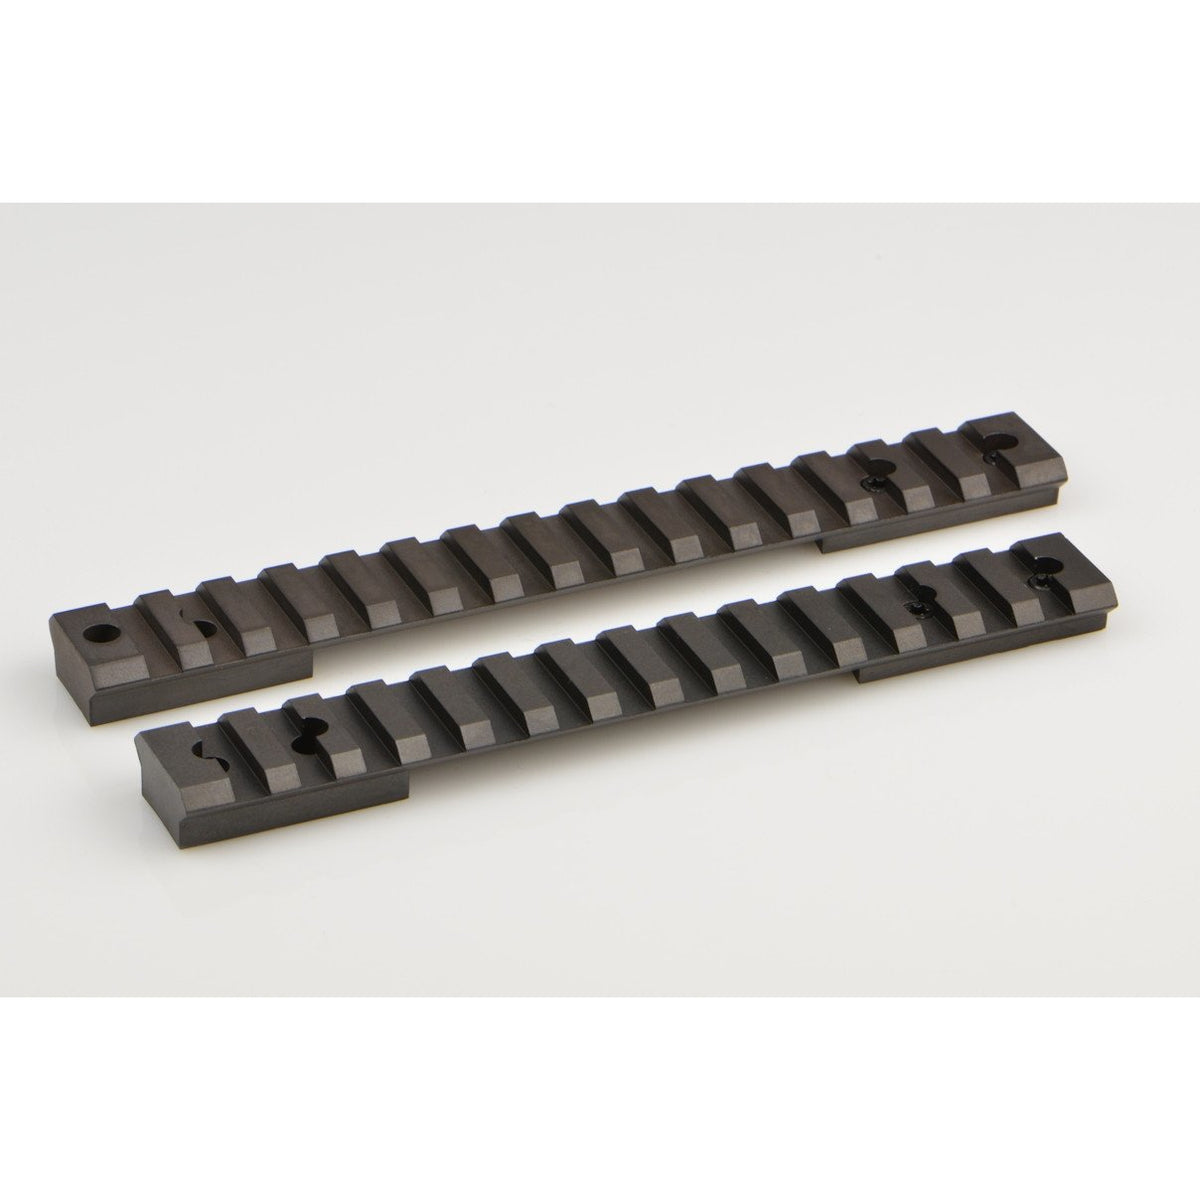 Warne Tactical Rail for Howa/Vanguard Long Action (Discontinued)